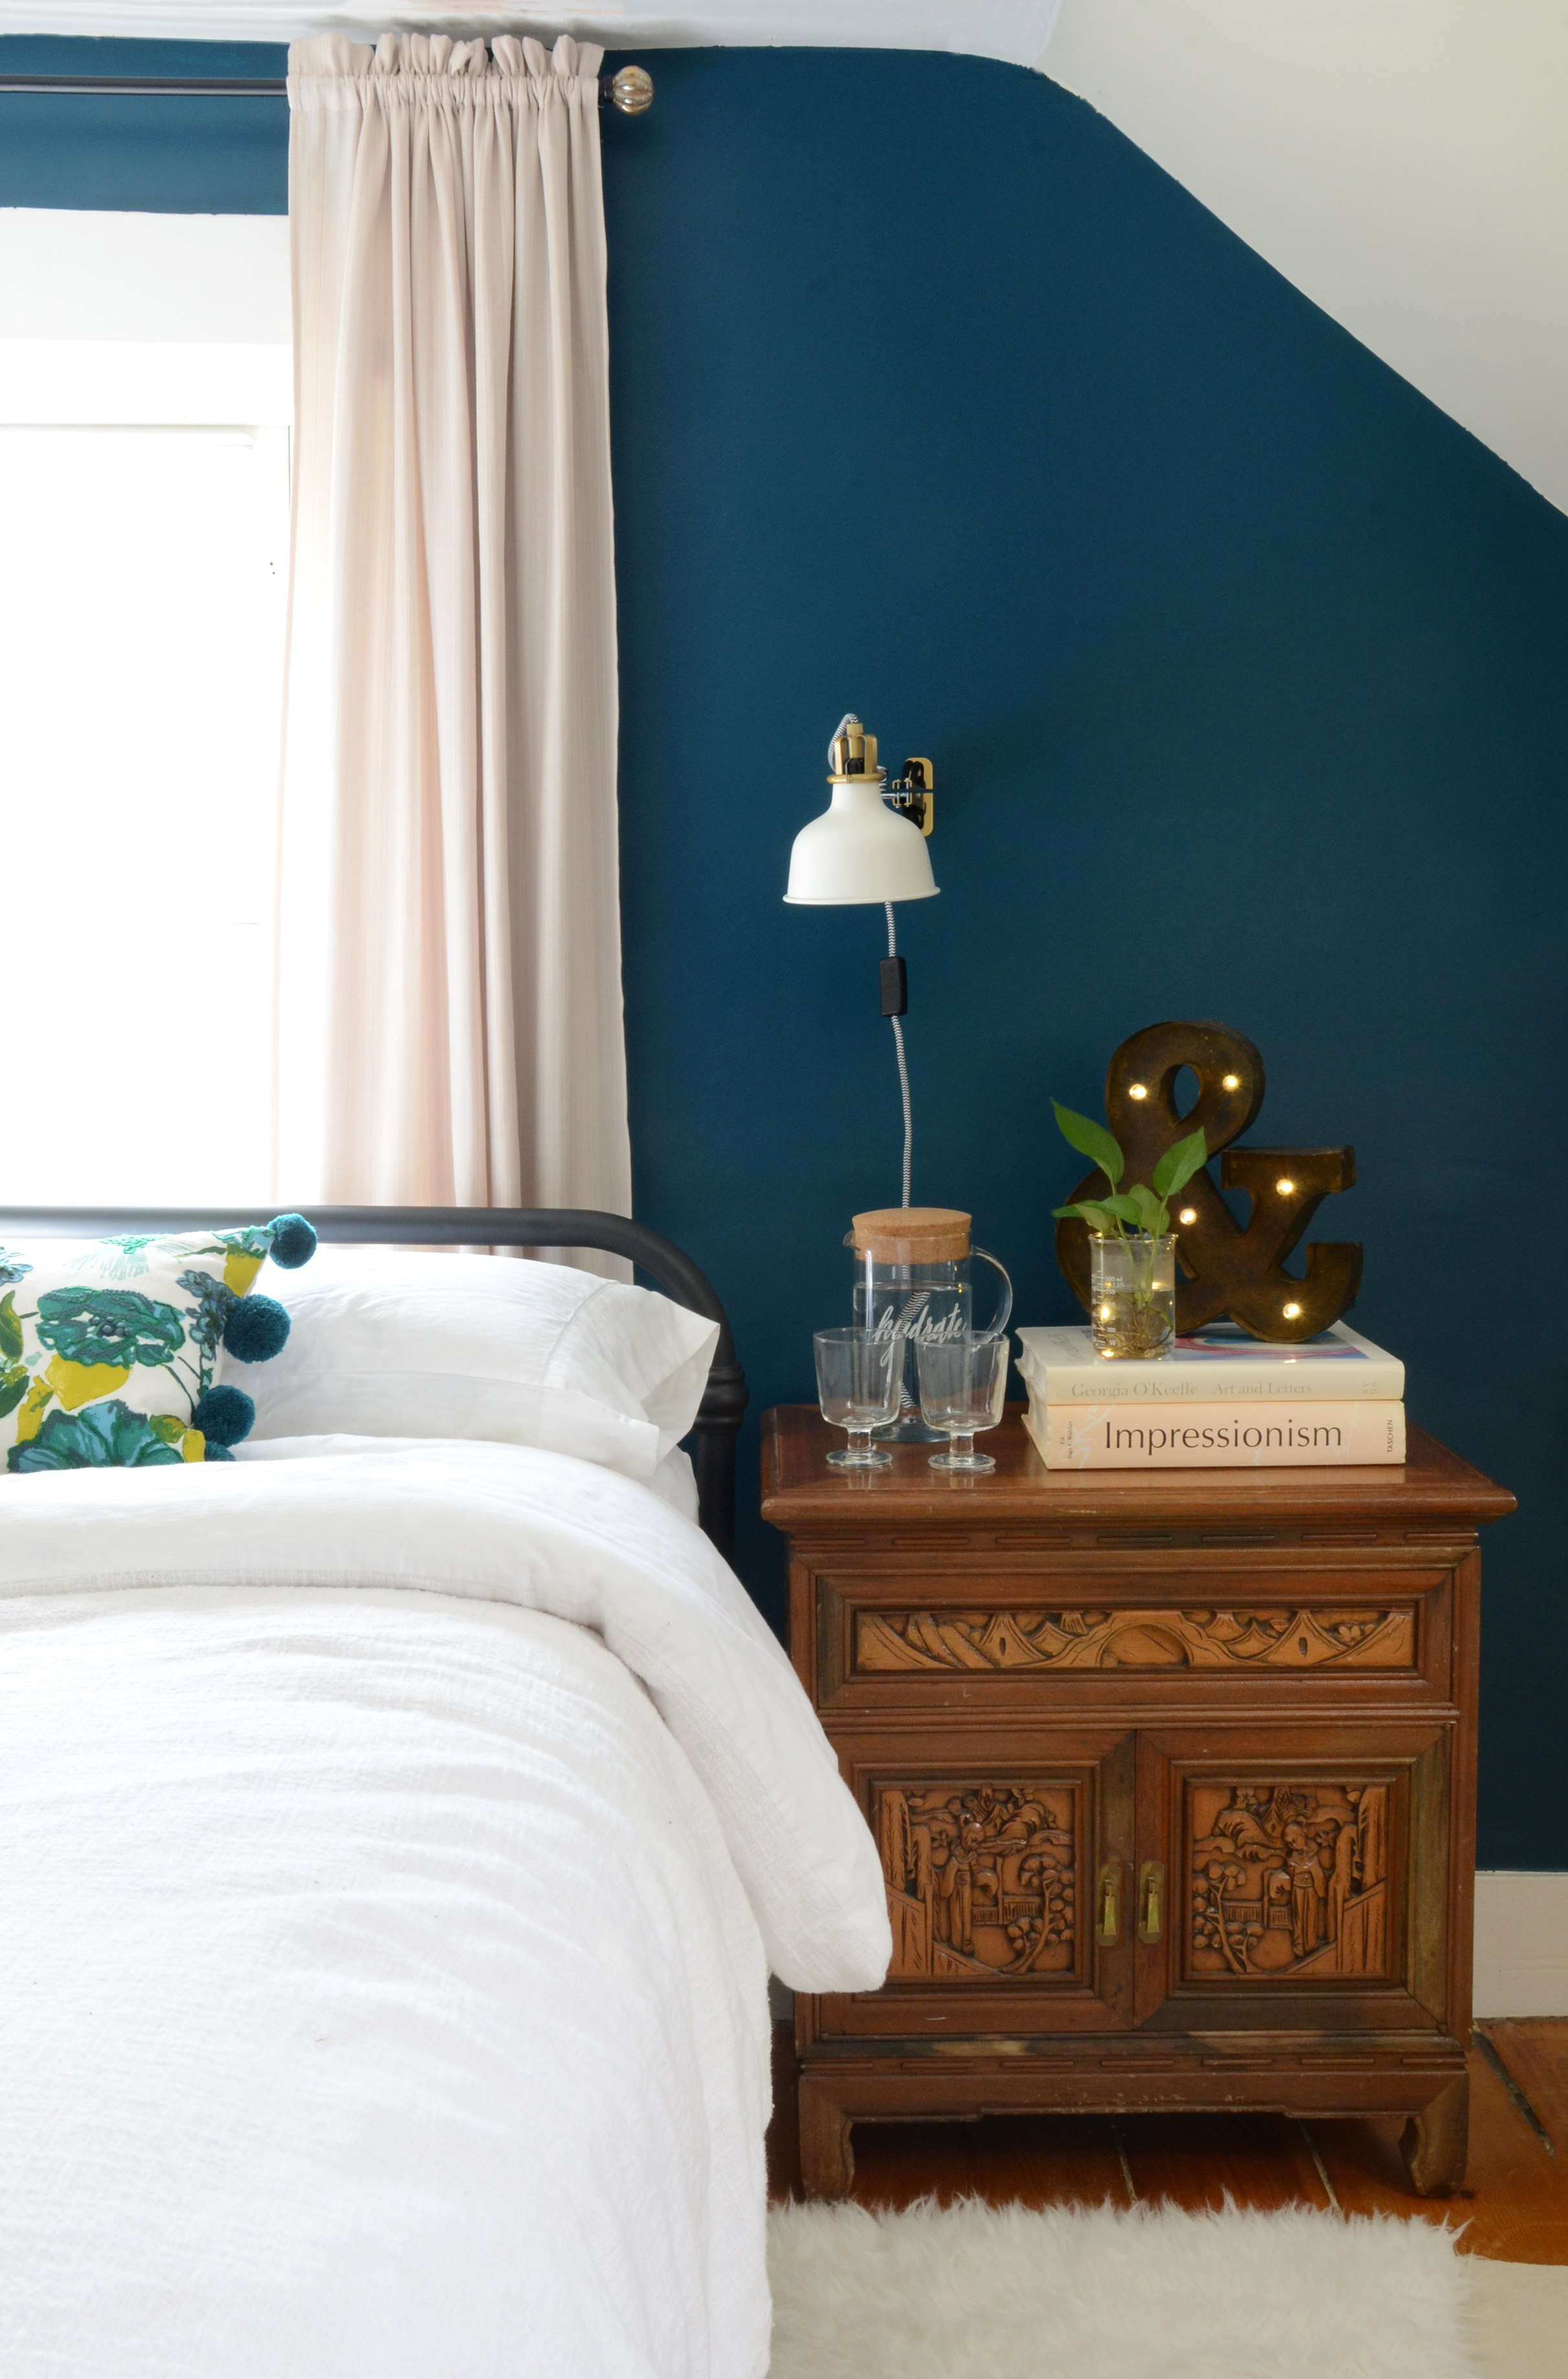 One Room Challenge: Turquoise Blue and White Guest Bedroom Makeover Reveal /// By Design Fixation